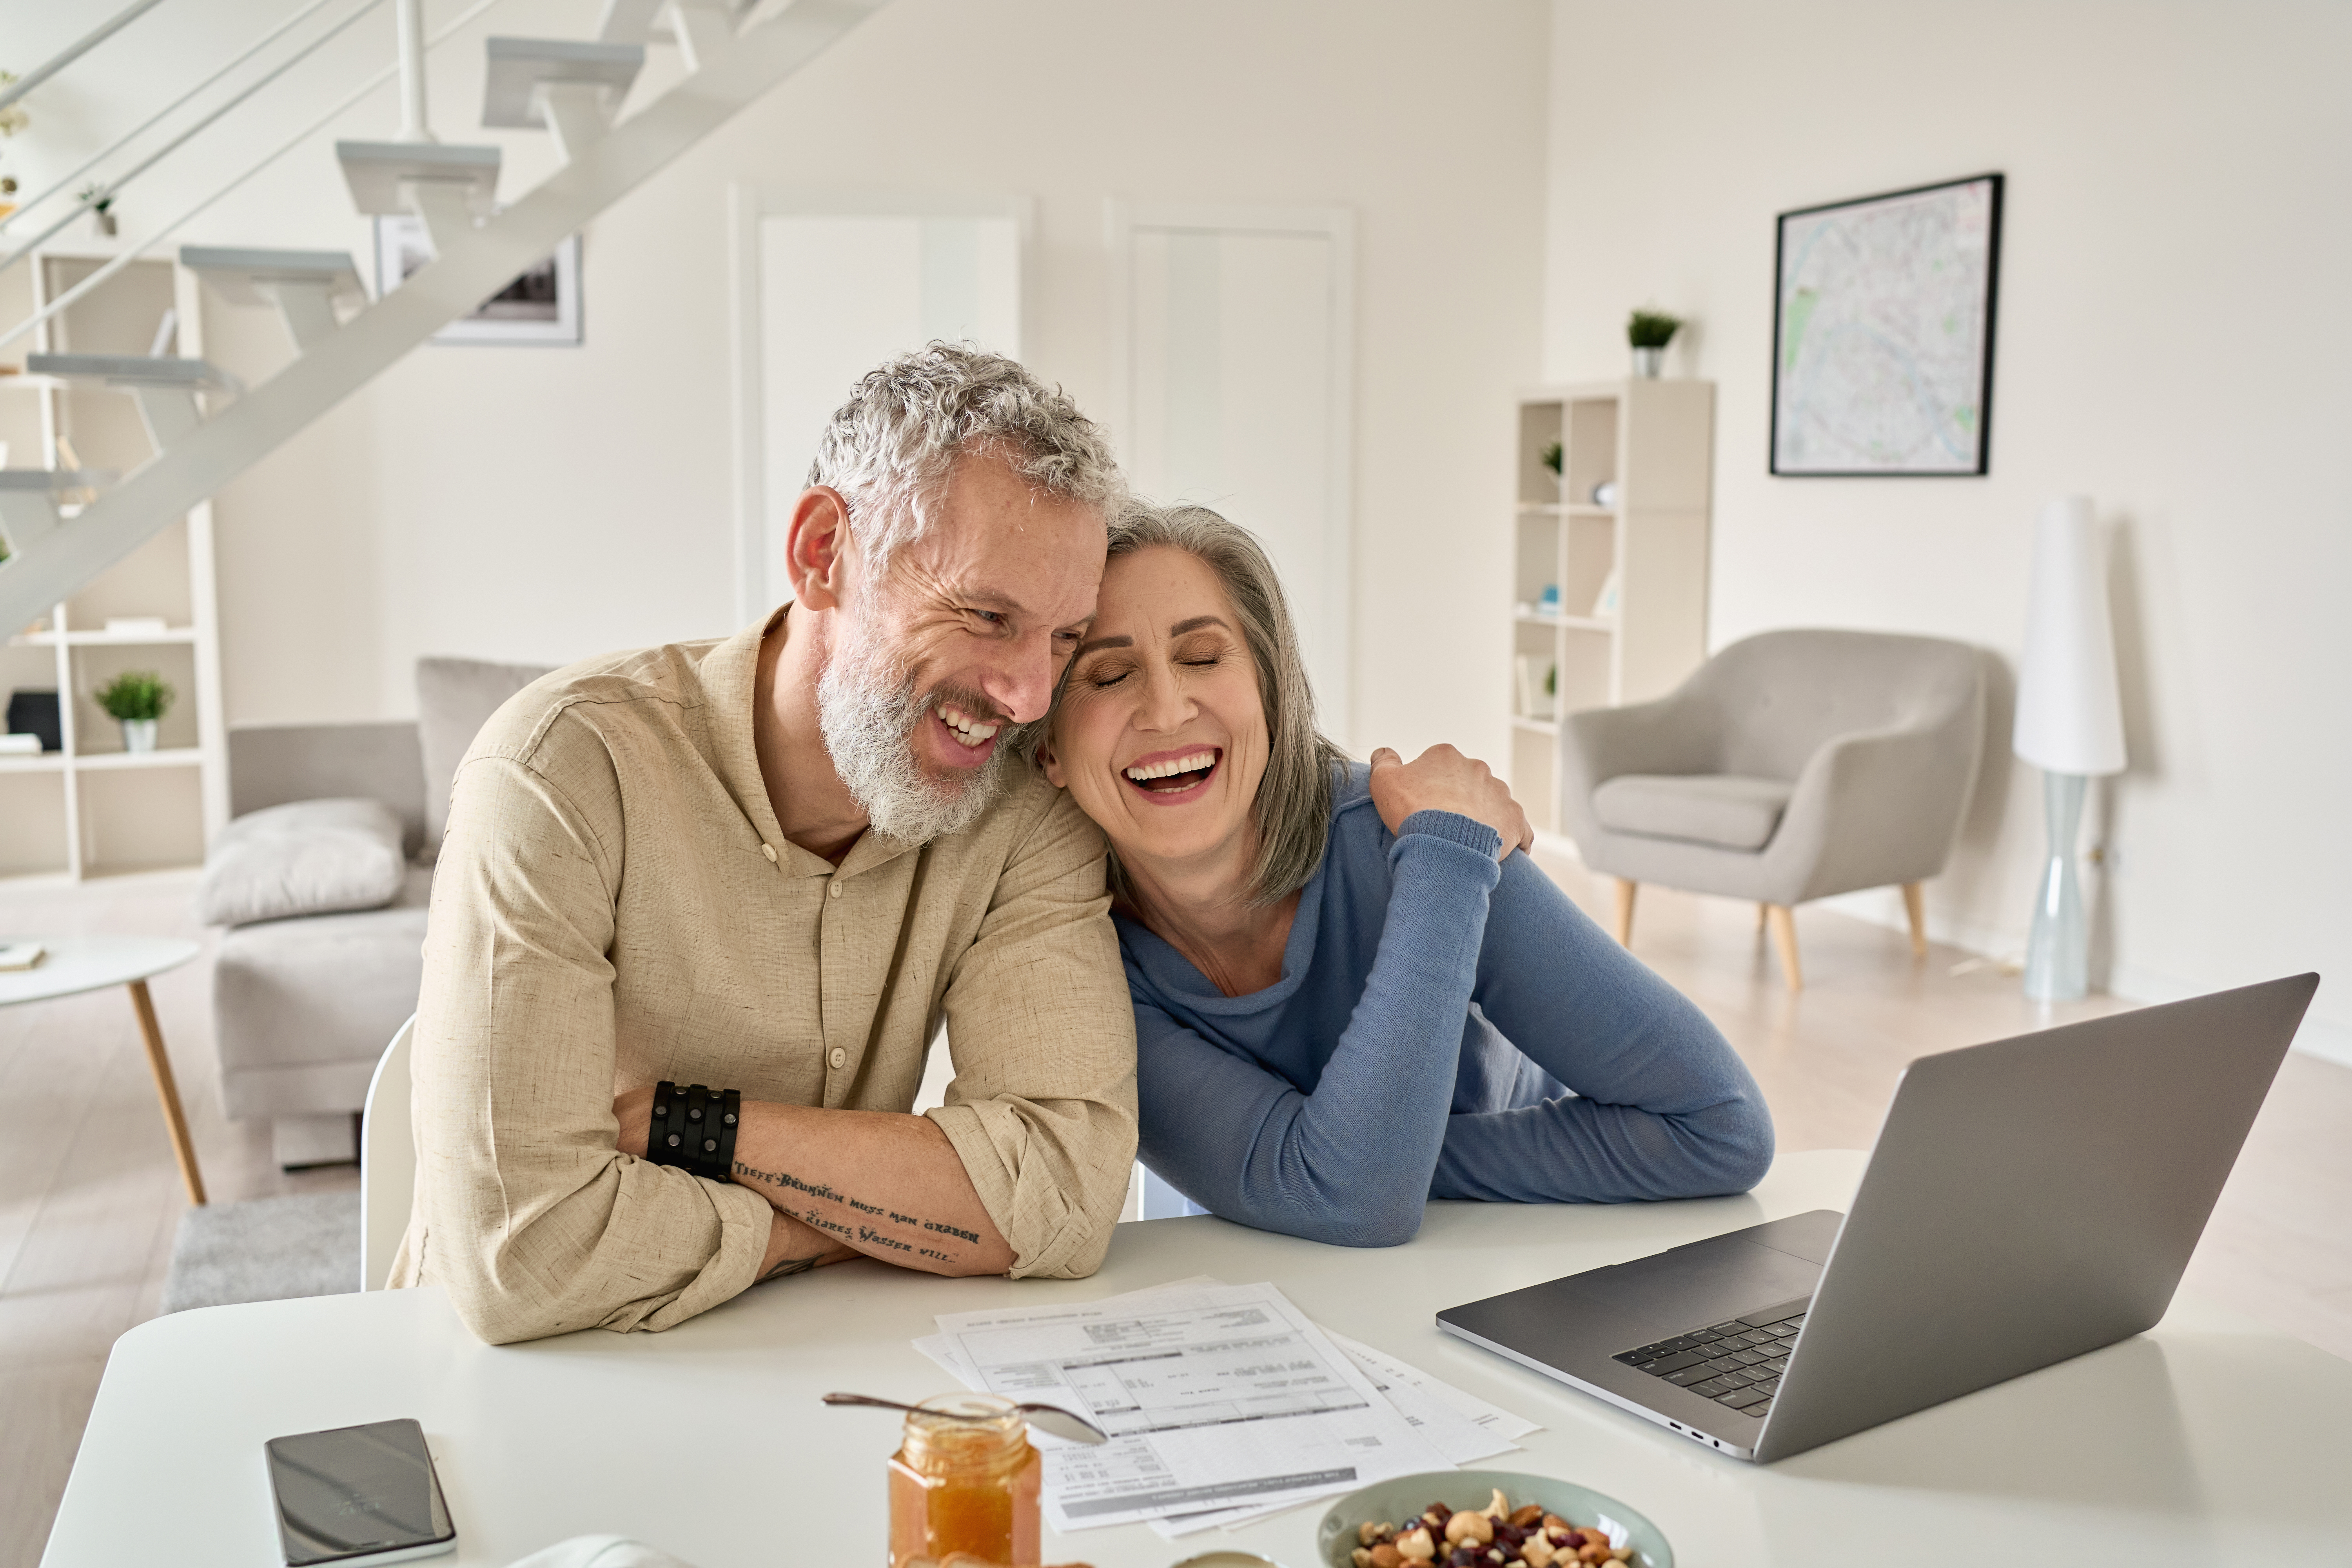 A middle-aged couple laughs | Source: Shutterstock